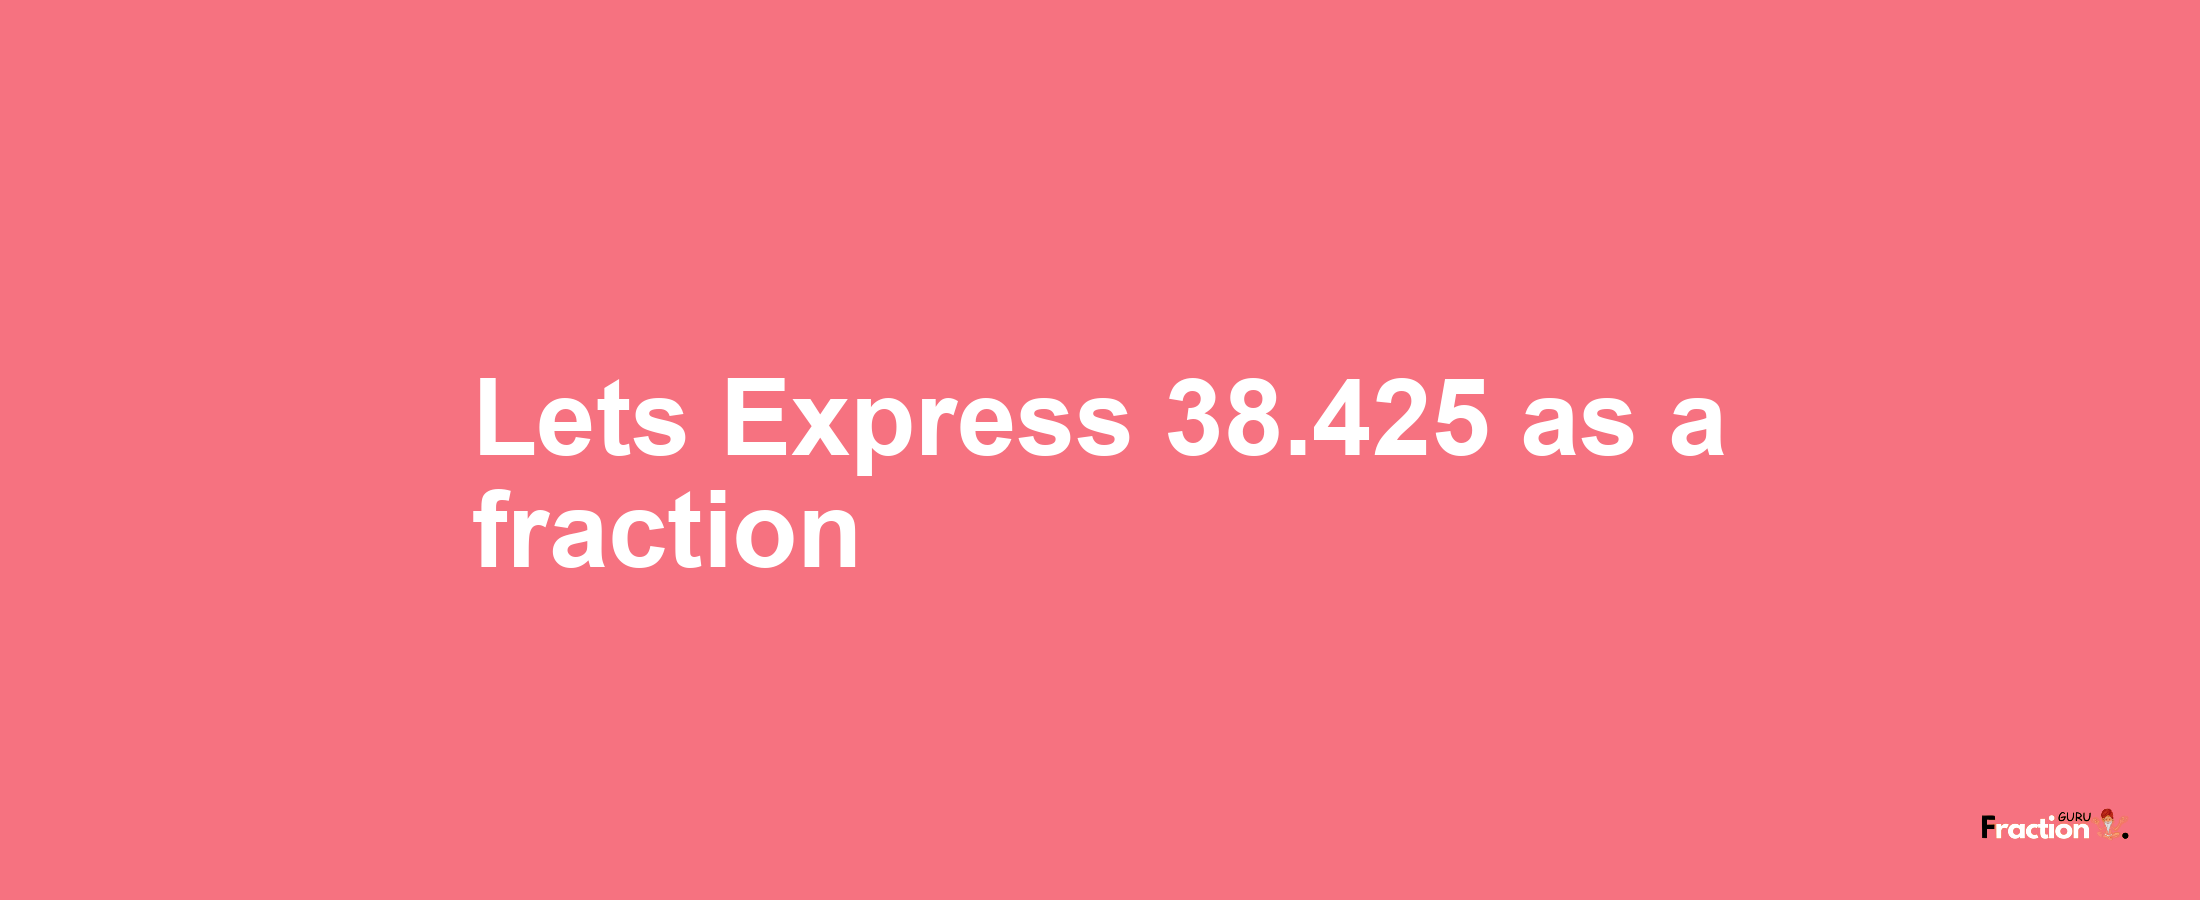 Lets Express 38.425 as afraction